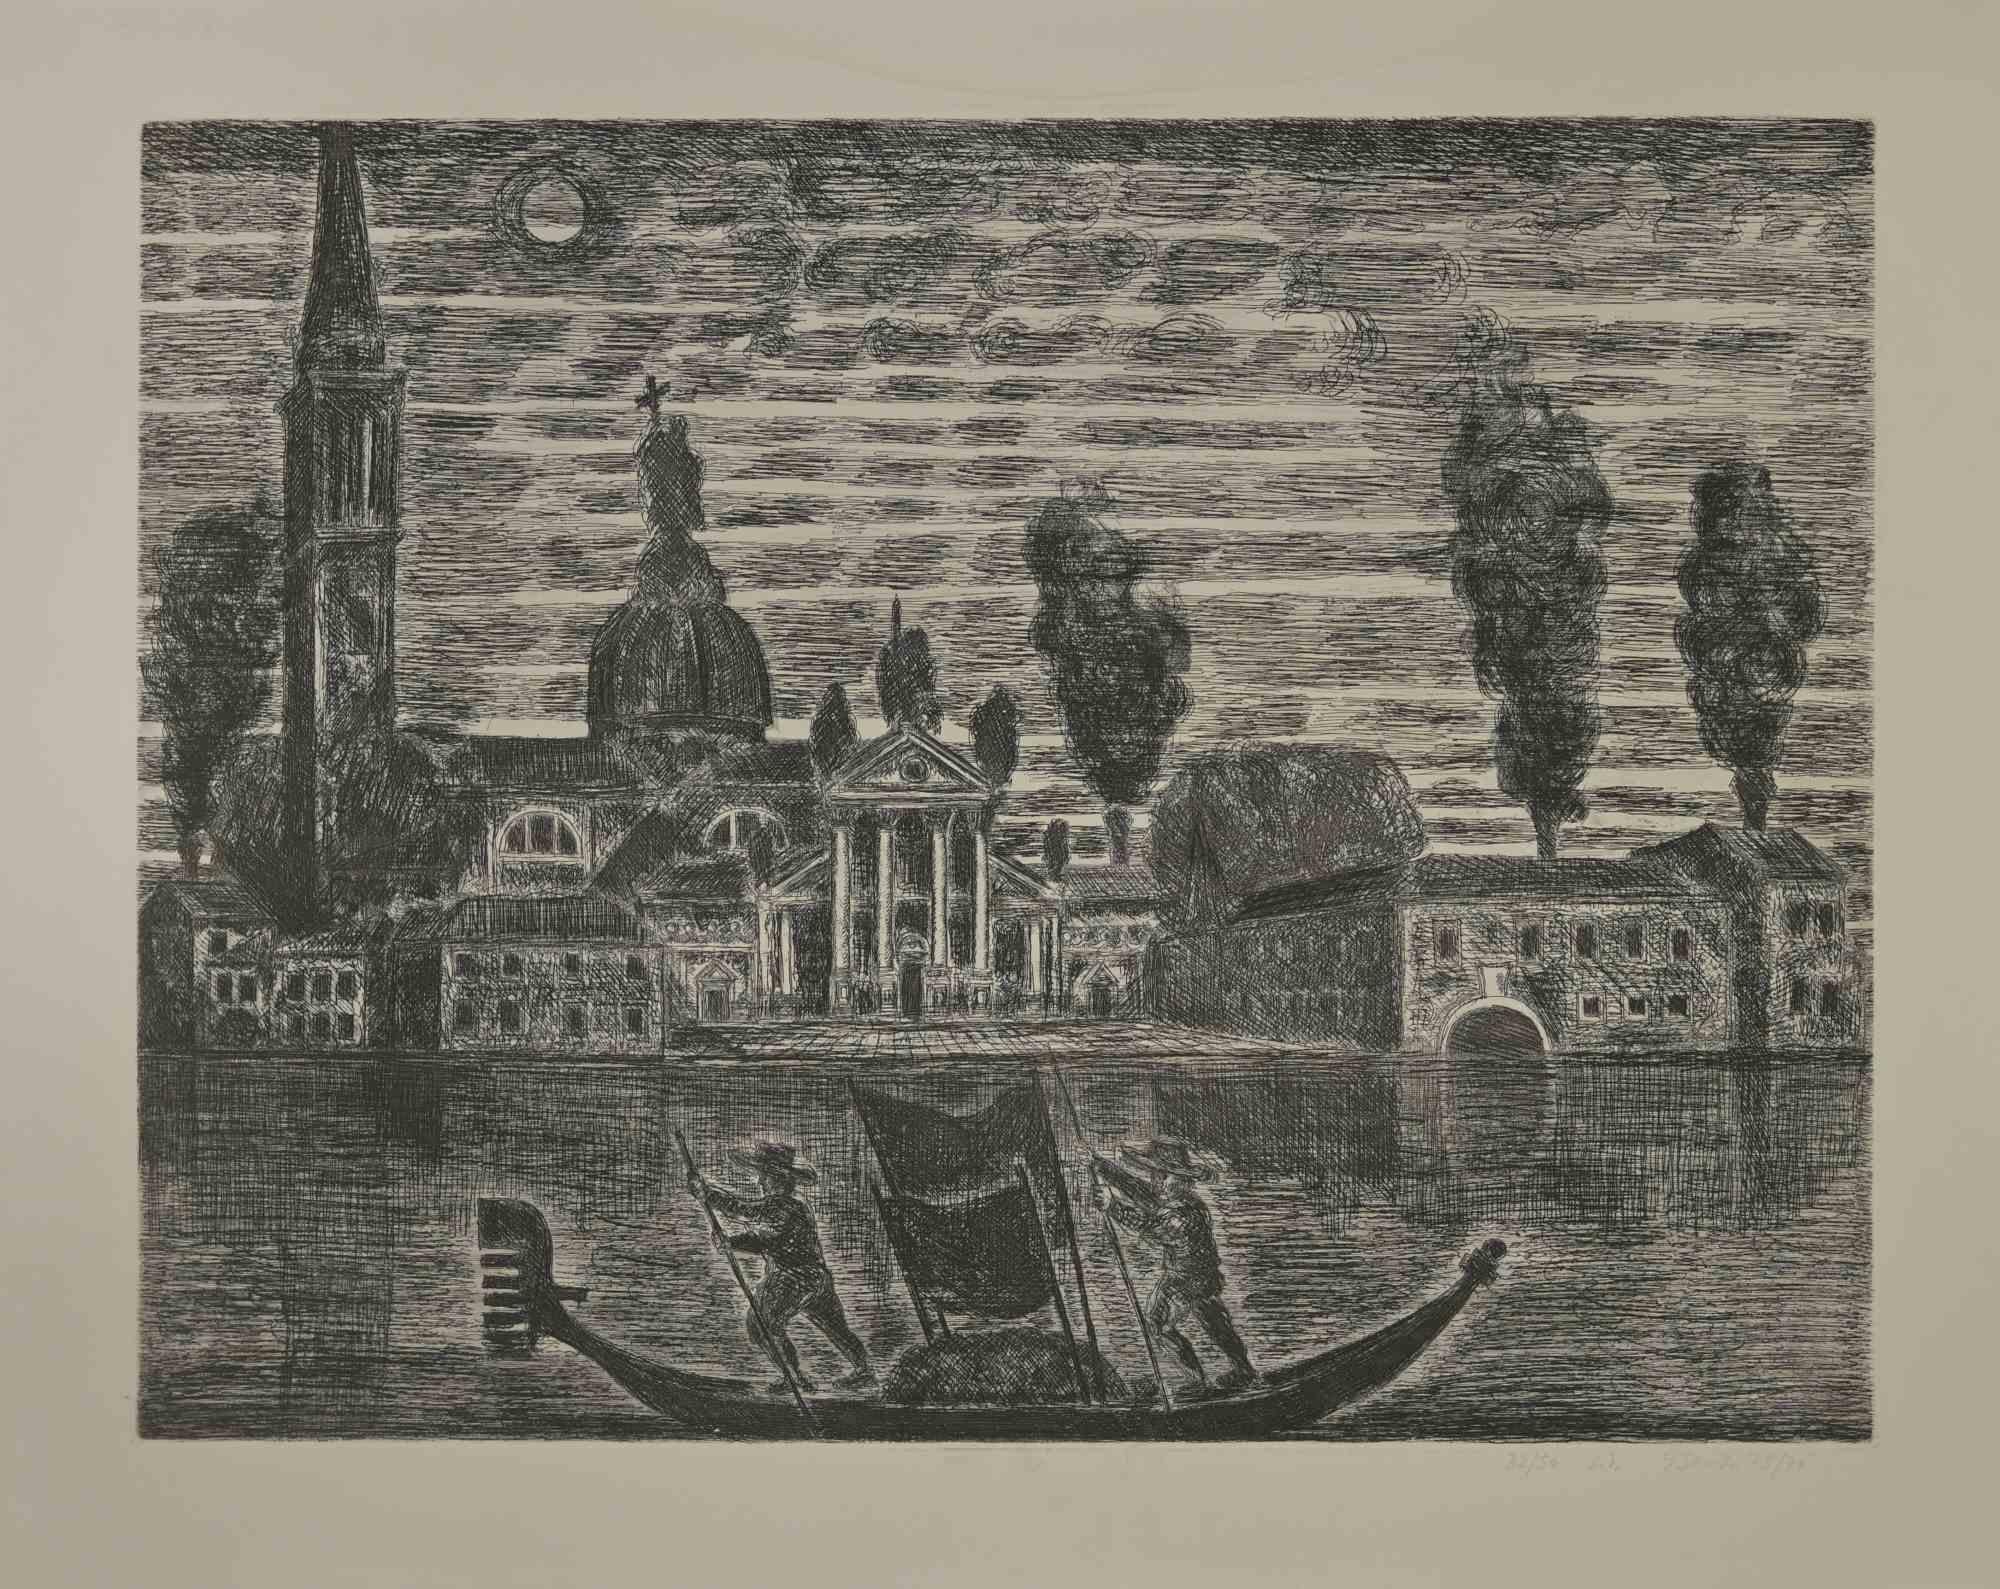 Gondoliers in Venice is an original etching realized by Gianpaolo Berto in 1974.

60 X 75 cm , no frame.

Edition 32/50. Numbered and firmed by the artist in the lower margin.

Good conditions.

 

Gianpaolo Berto (1940) was born and raised in the